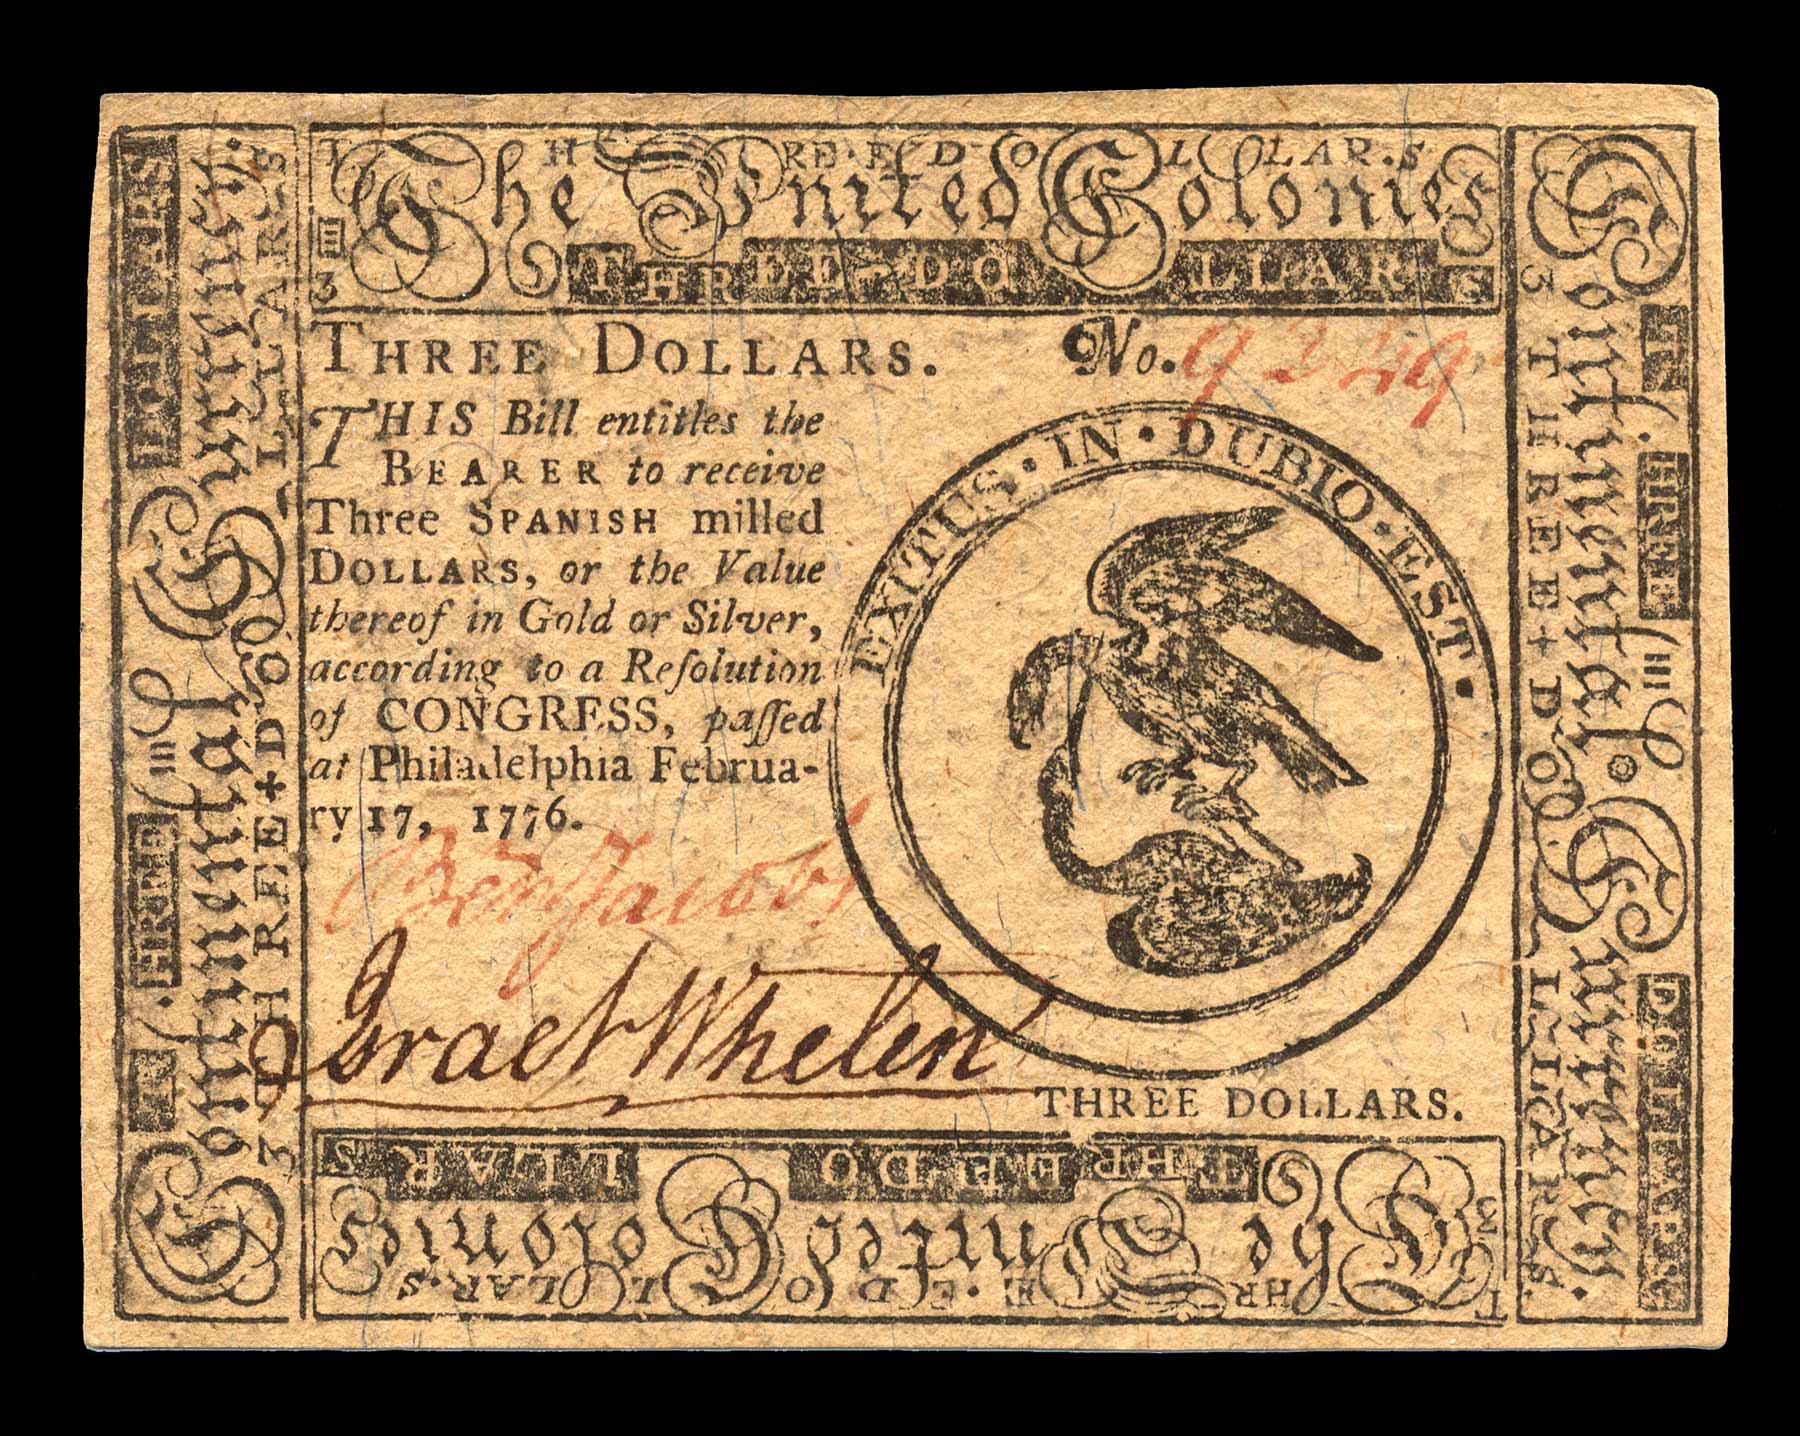 [Image: 1776_Continental_Currency.jpg]